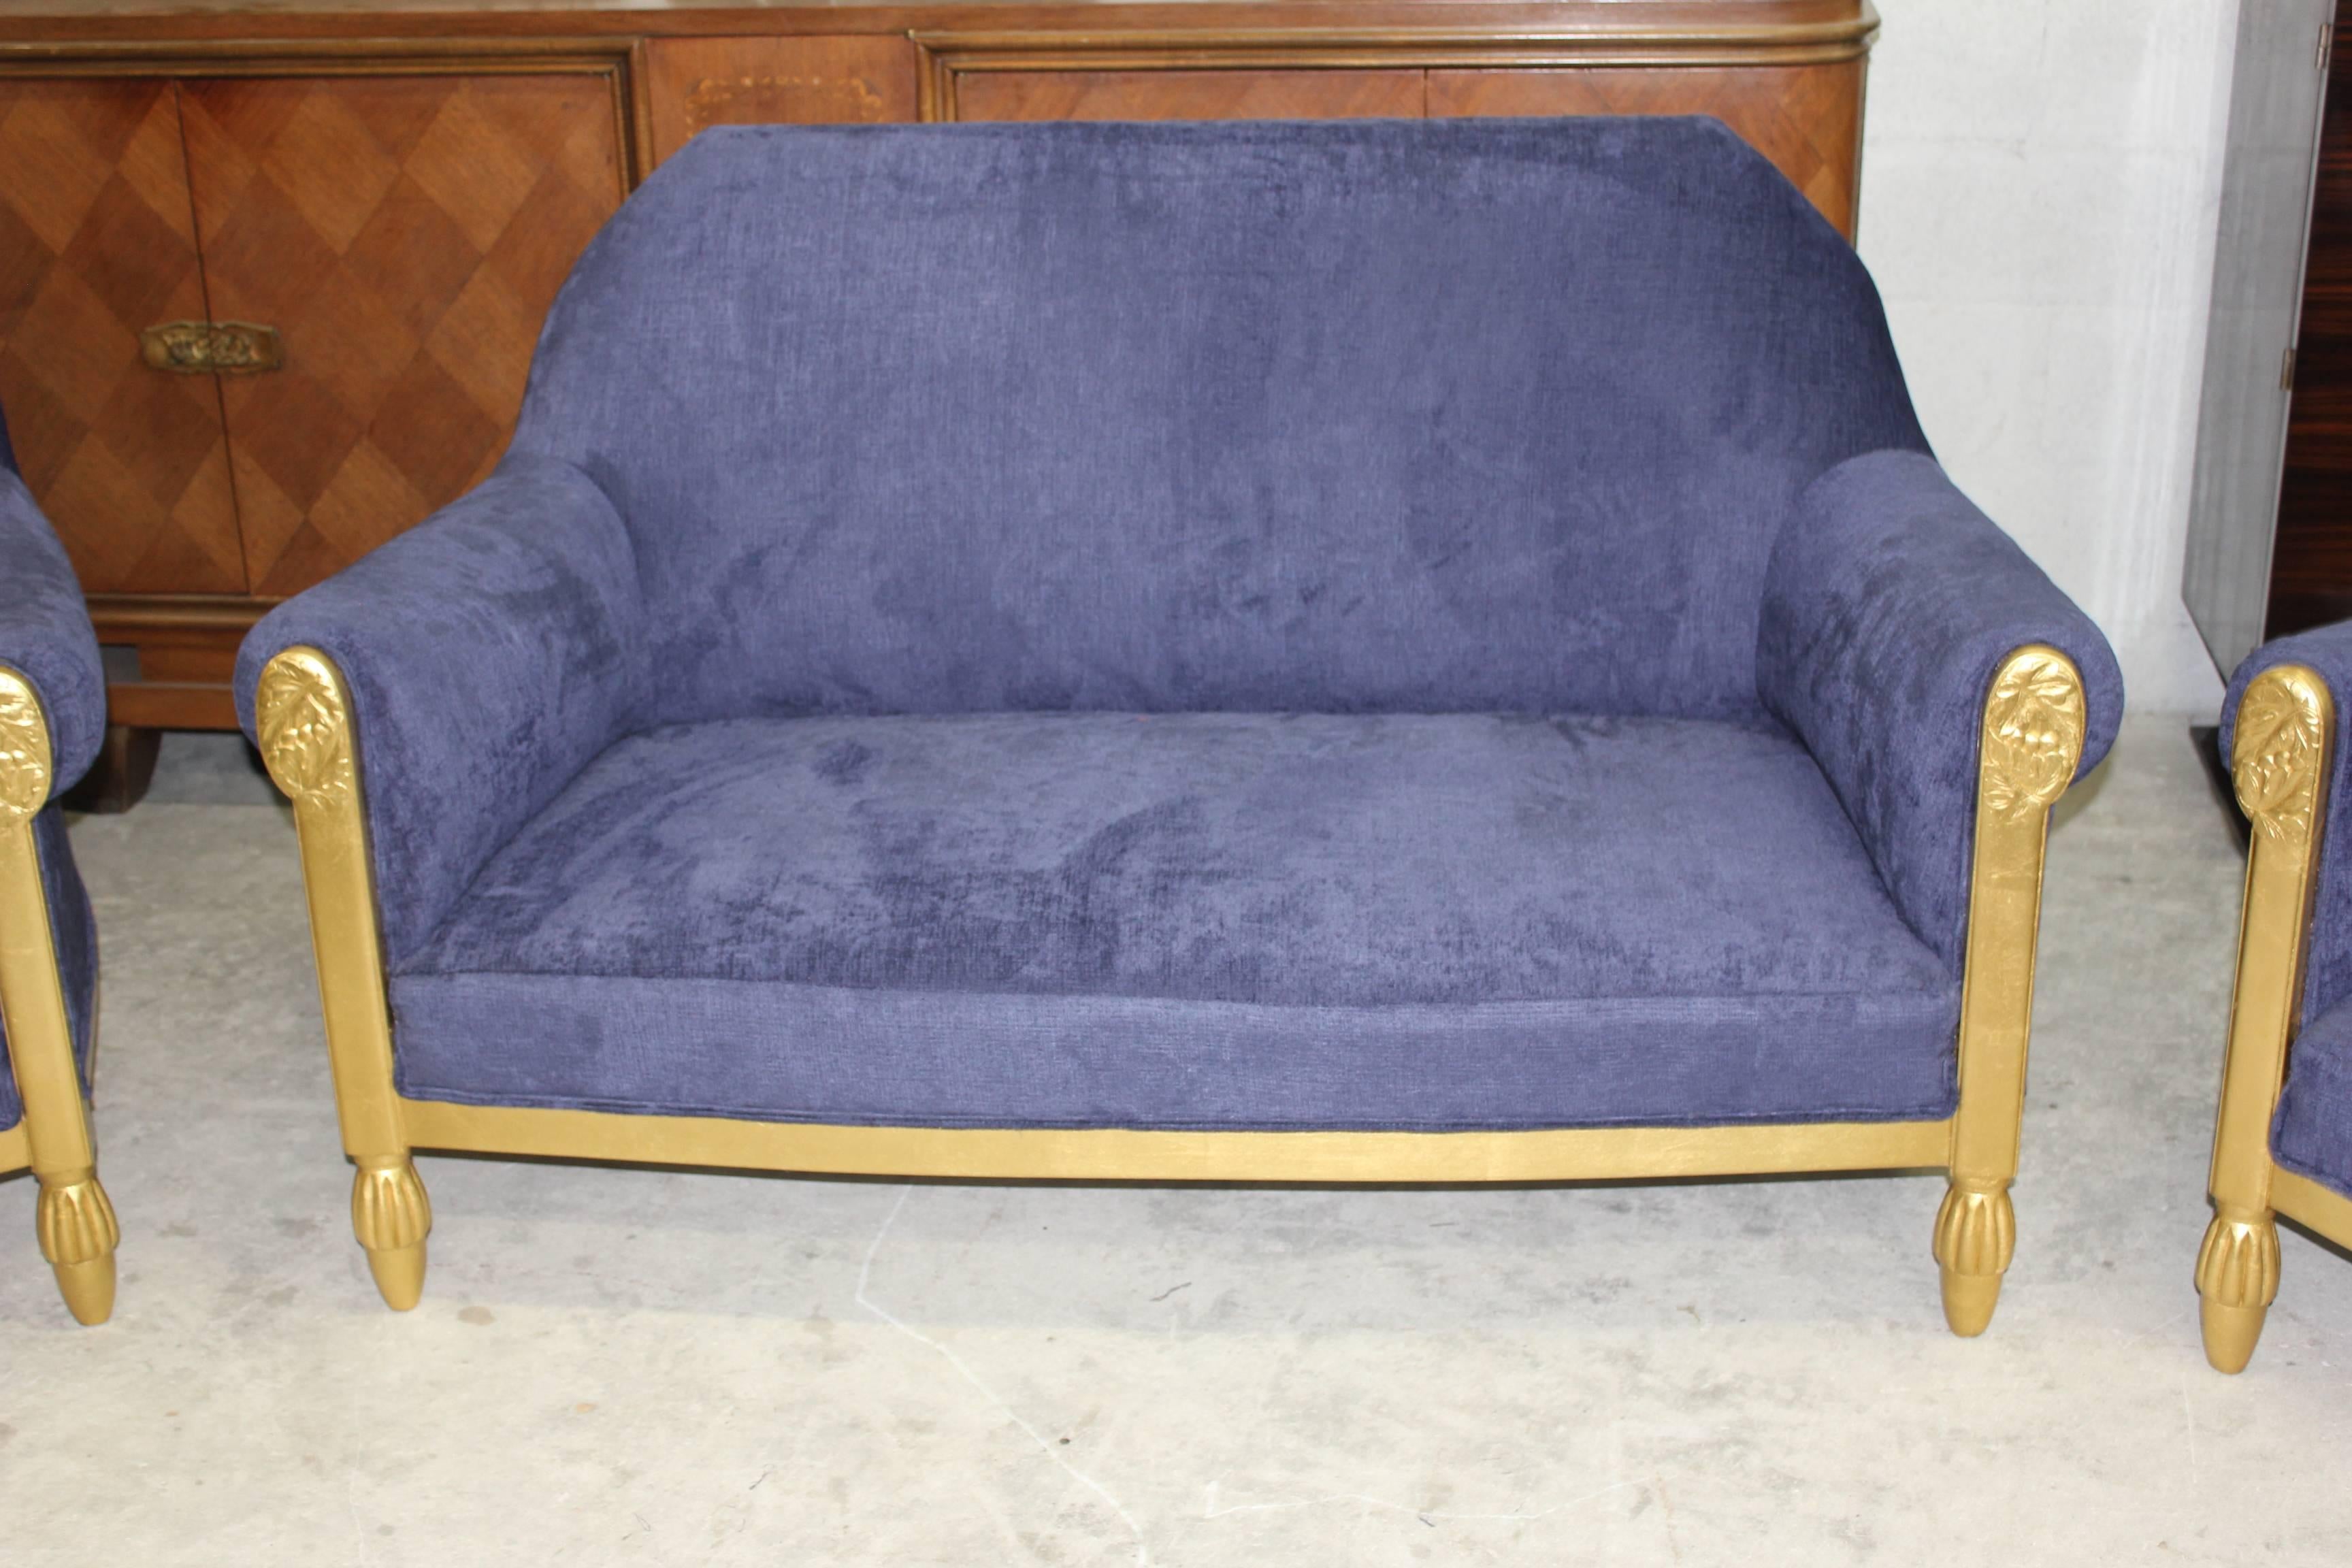 We present an elegant, Art Deco settee by one of the most important designers of the Art Deco period Paul Follot with gilded wood and decorative carved panels, in the Classic early 1920s , all of which have been newly re-upholstered in royal blue